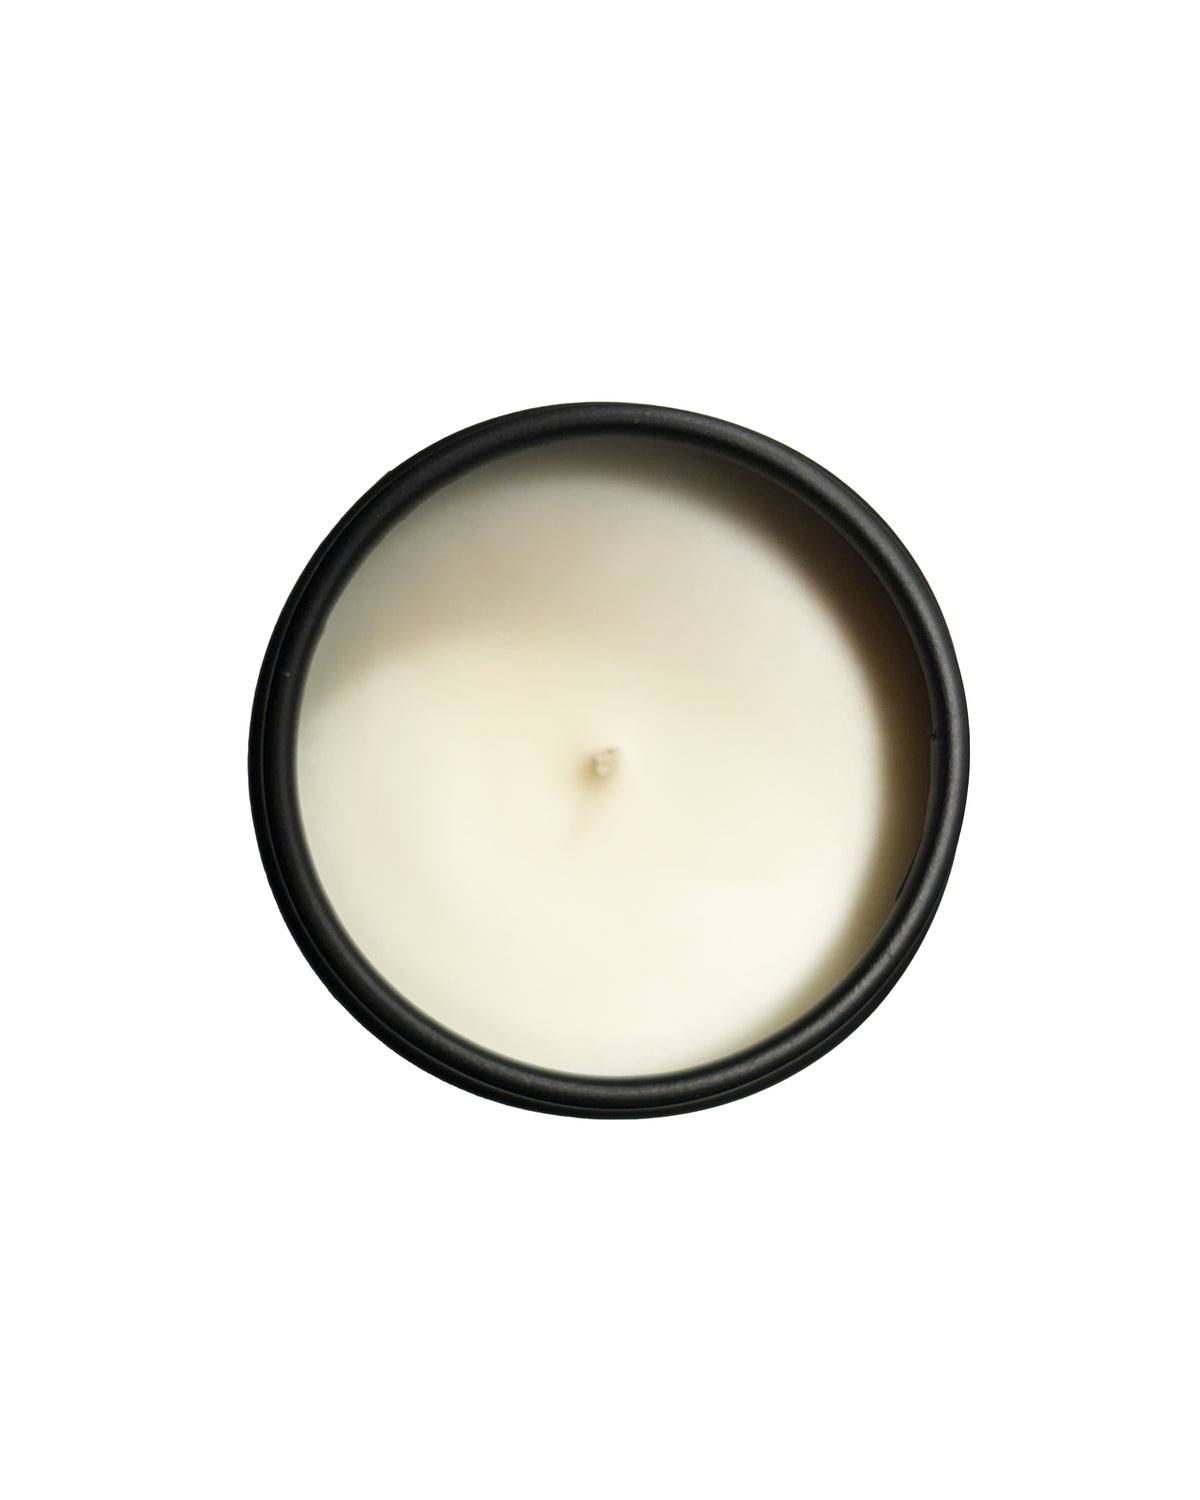 C. BREWSTER TRAVEL CANDLE